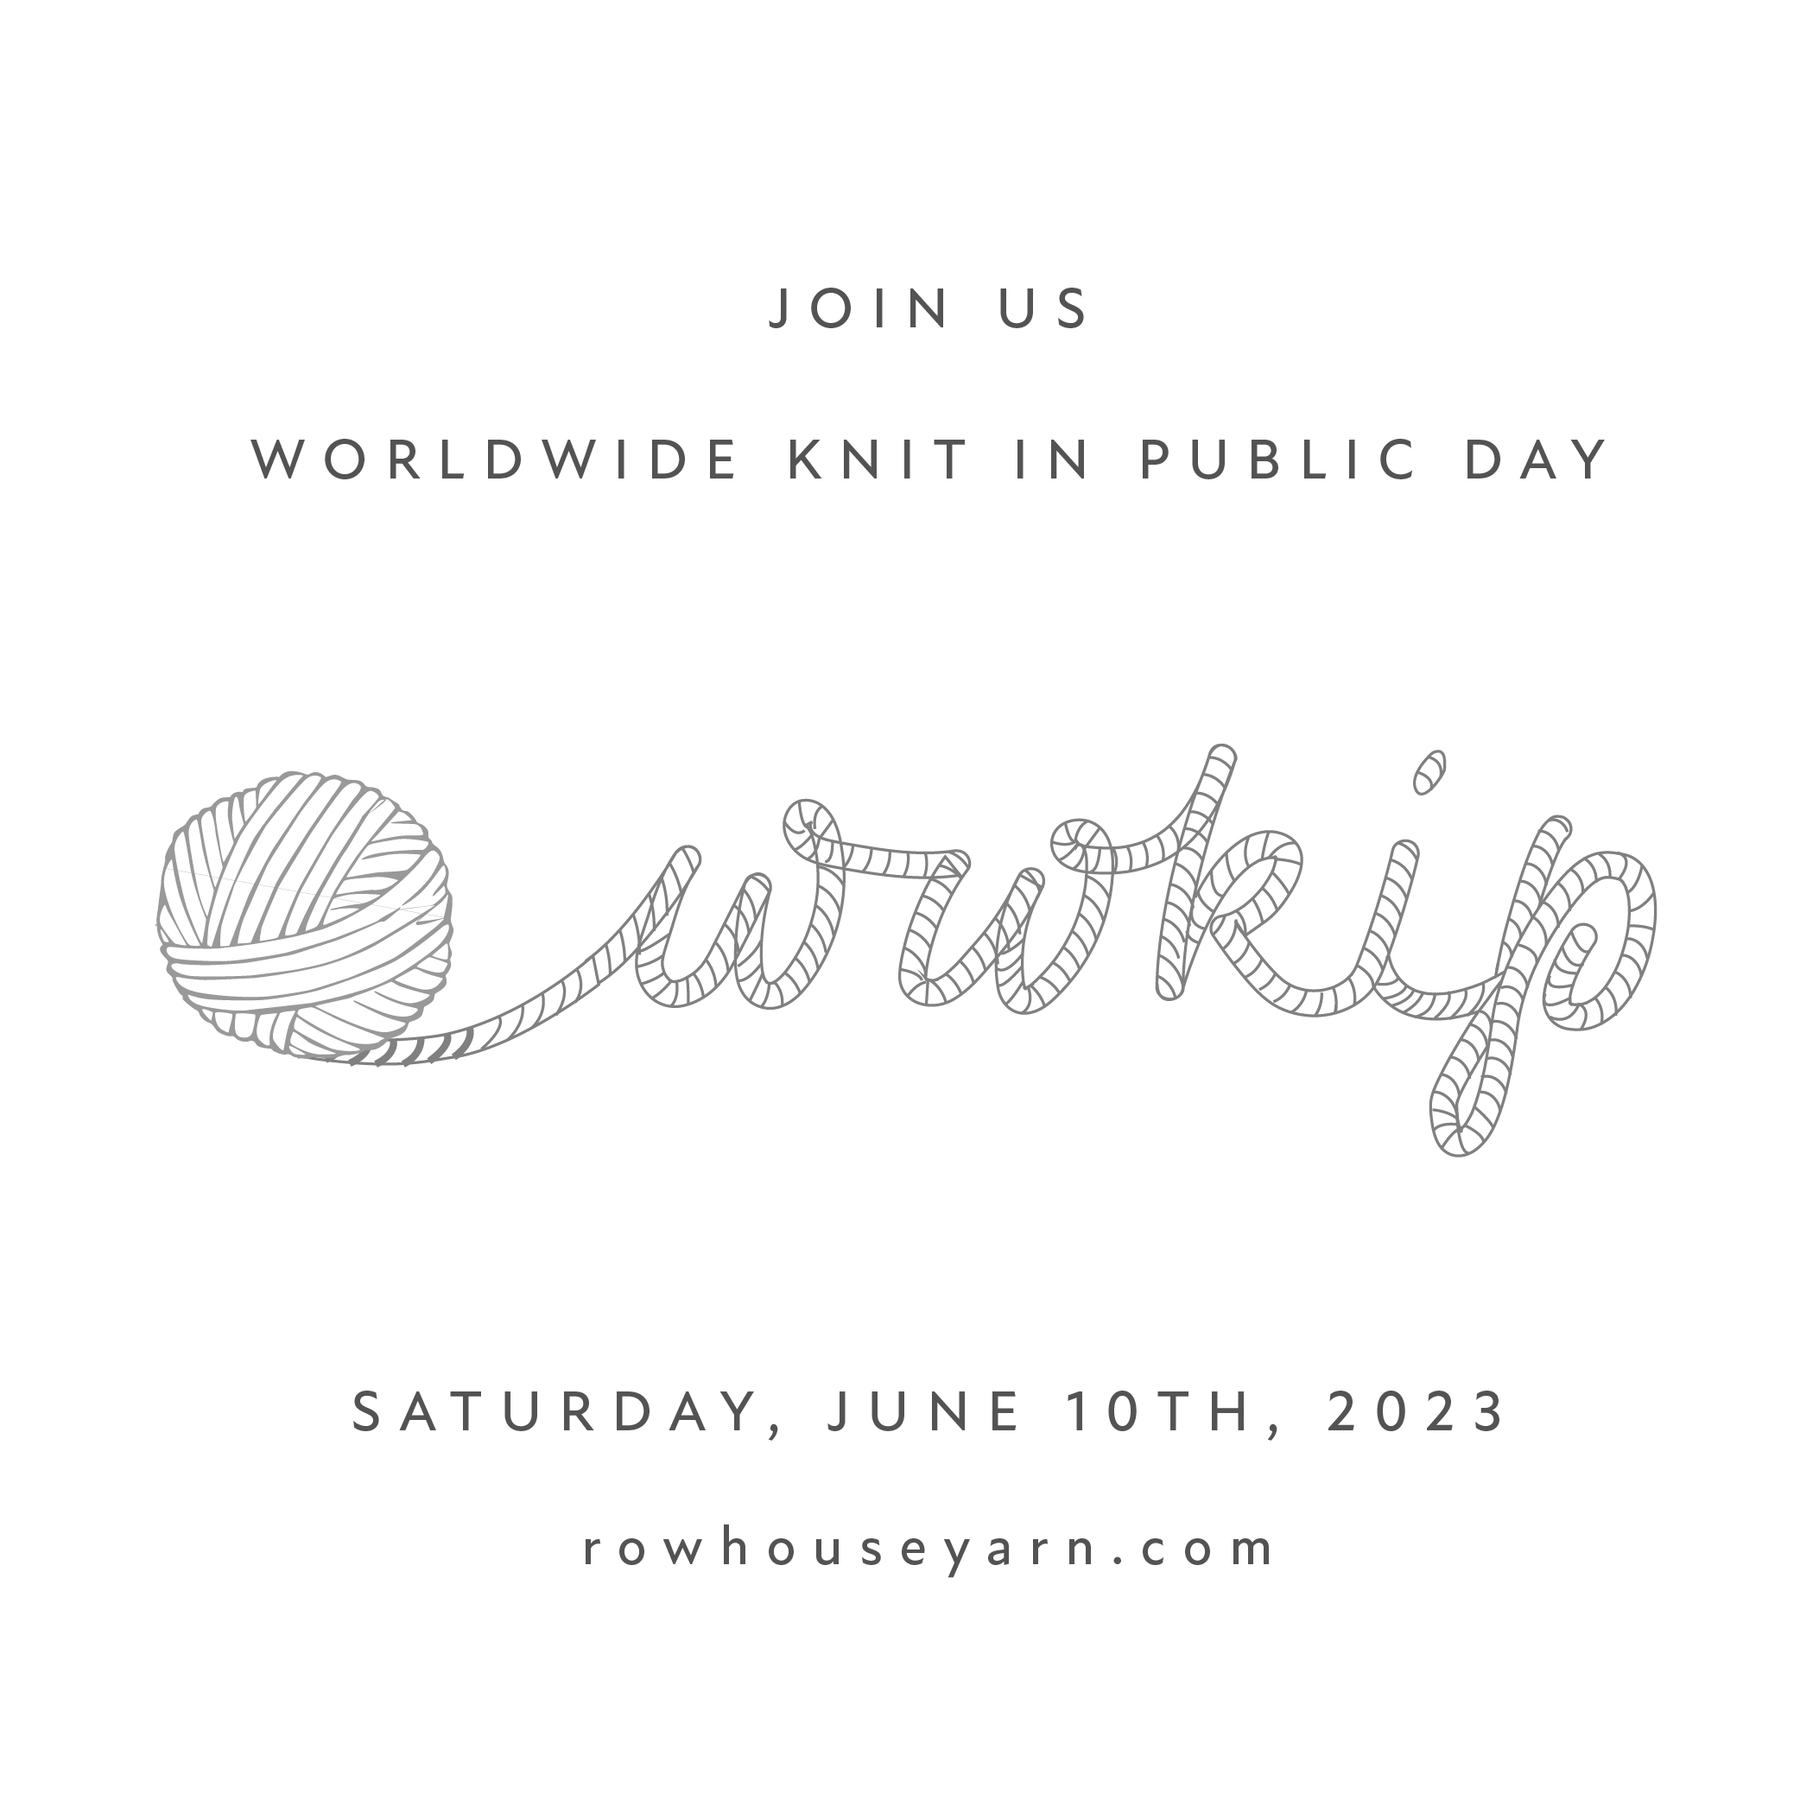 Join us in Seattle on June 10th for Worldwide Knit in Public Day 2023!